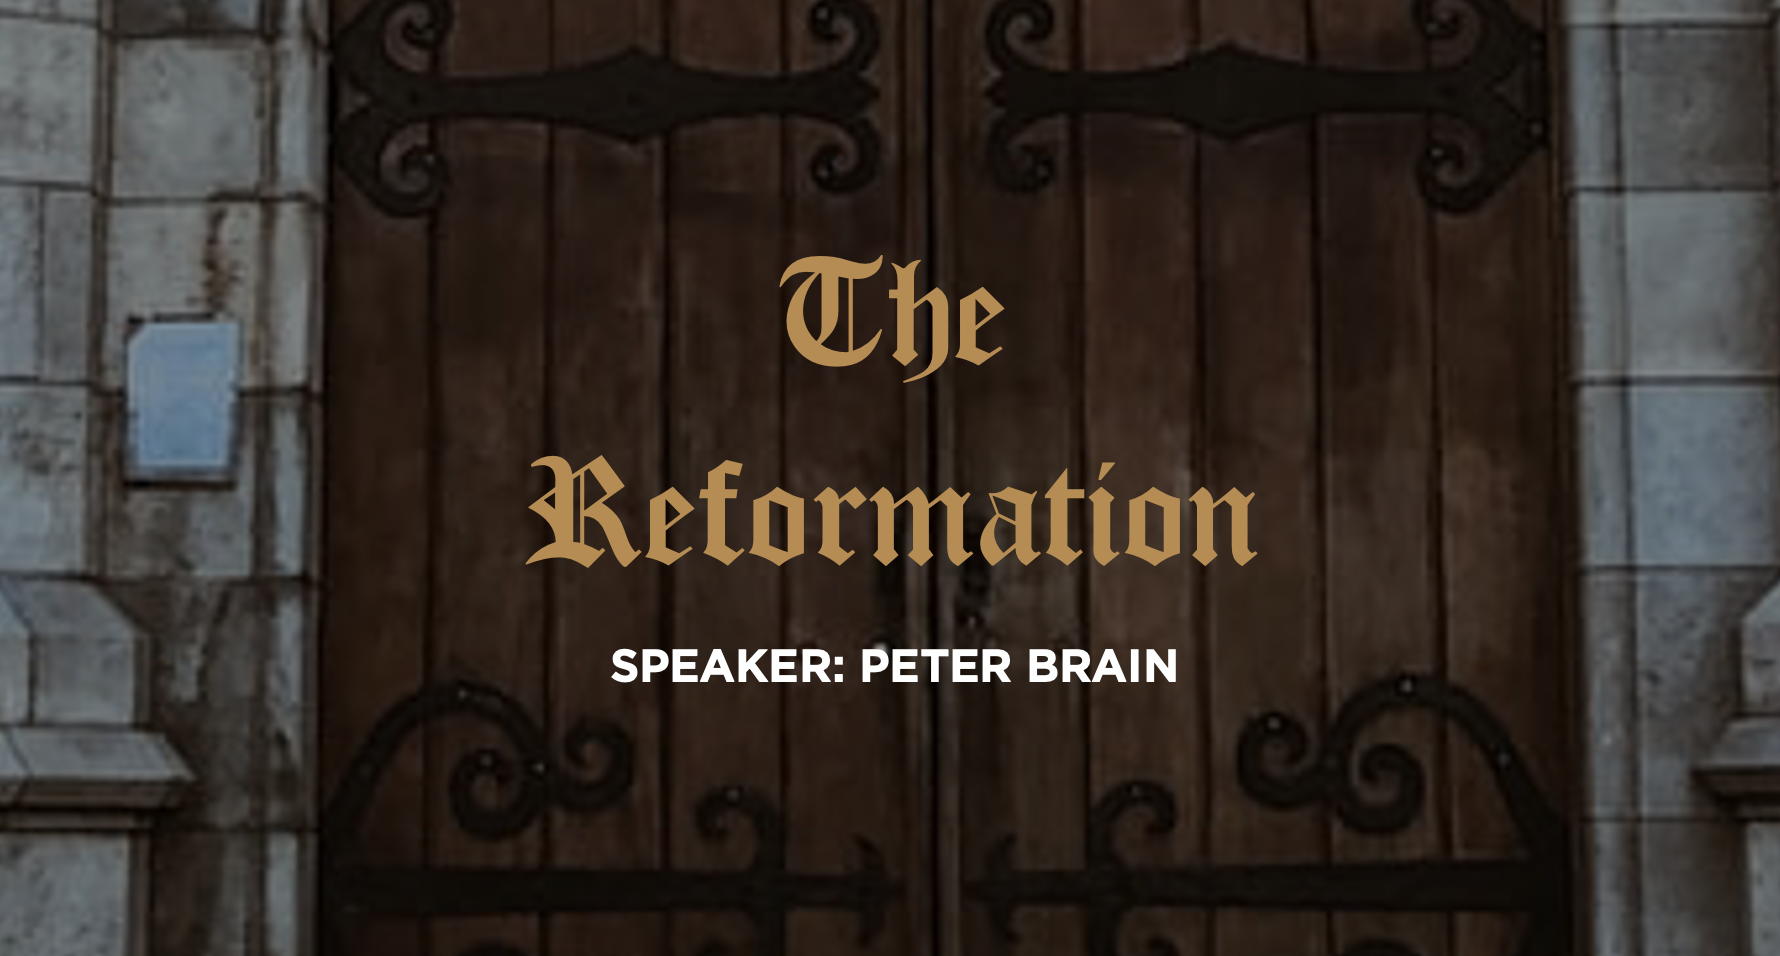 The Relevance of The Reformation